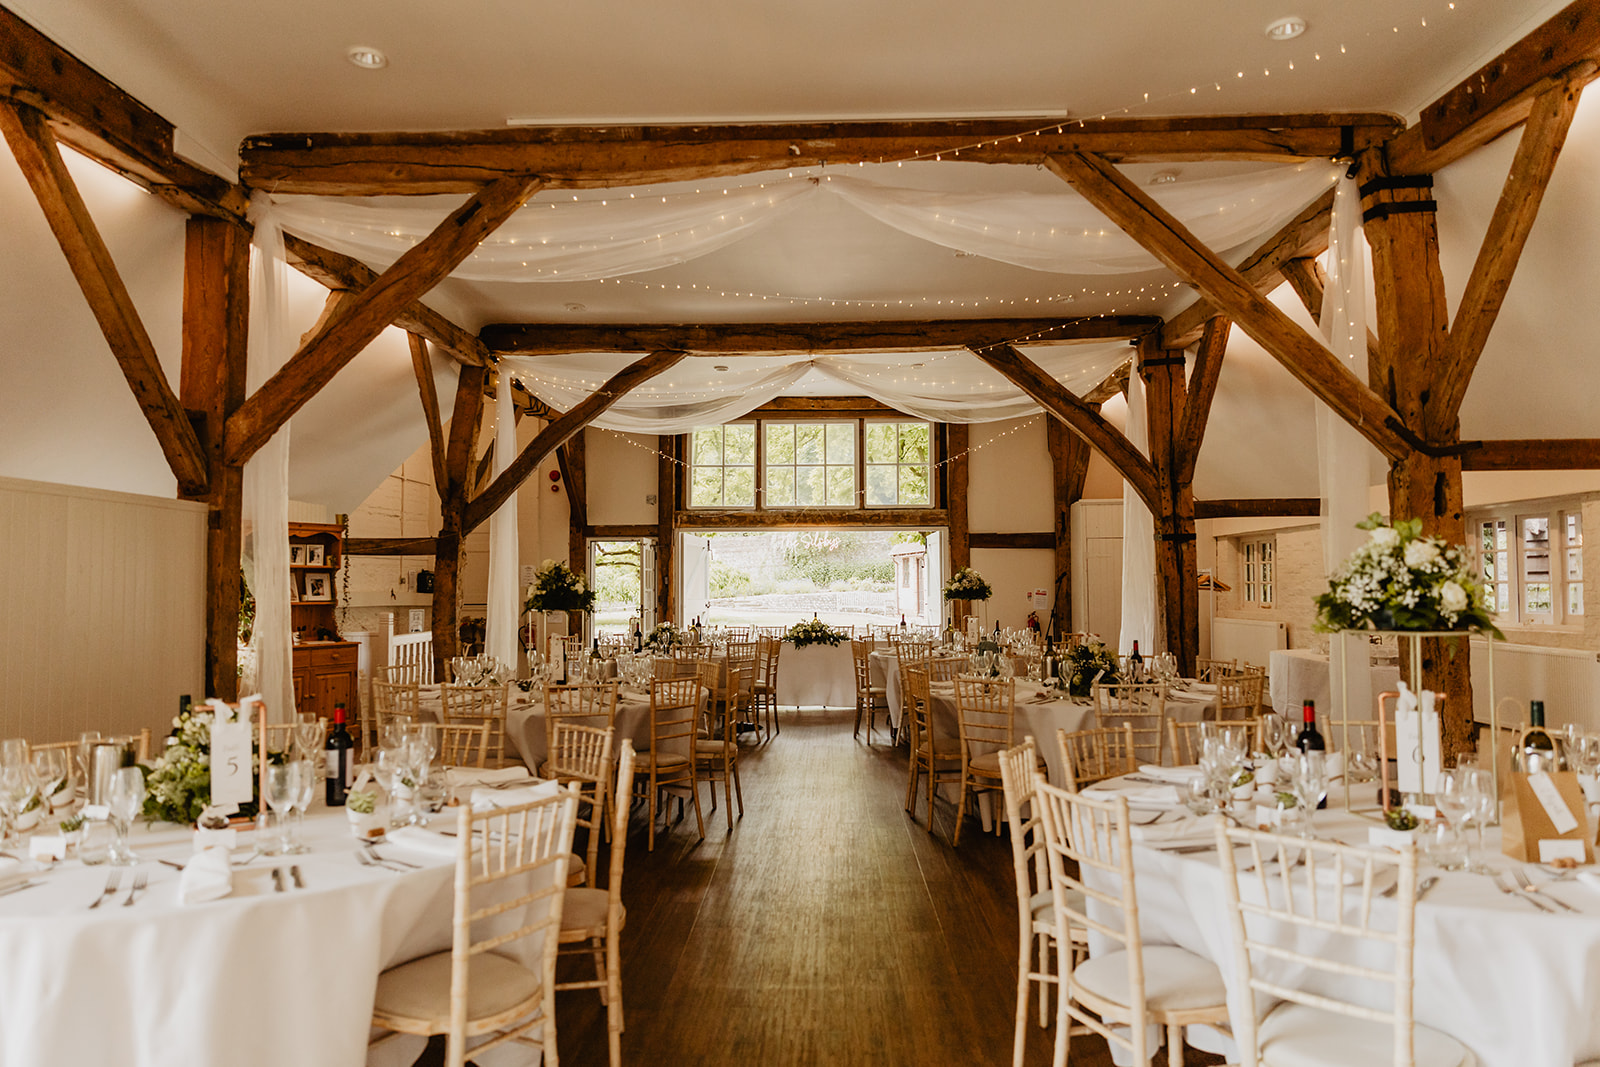 Wedding reception room at a Bury Manor Barn Wedding in Sussex. Photographer OliveJoy Photography.